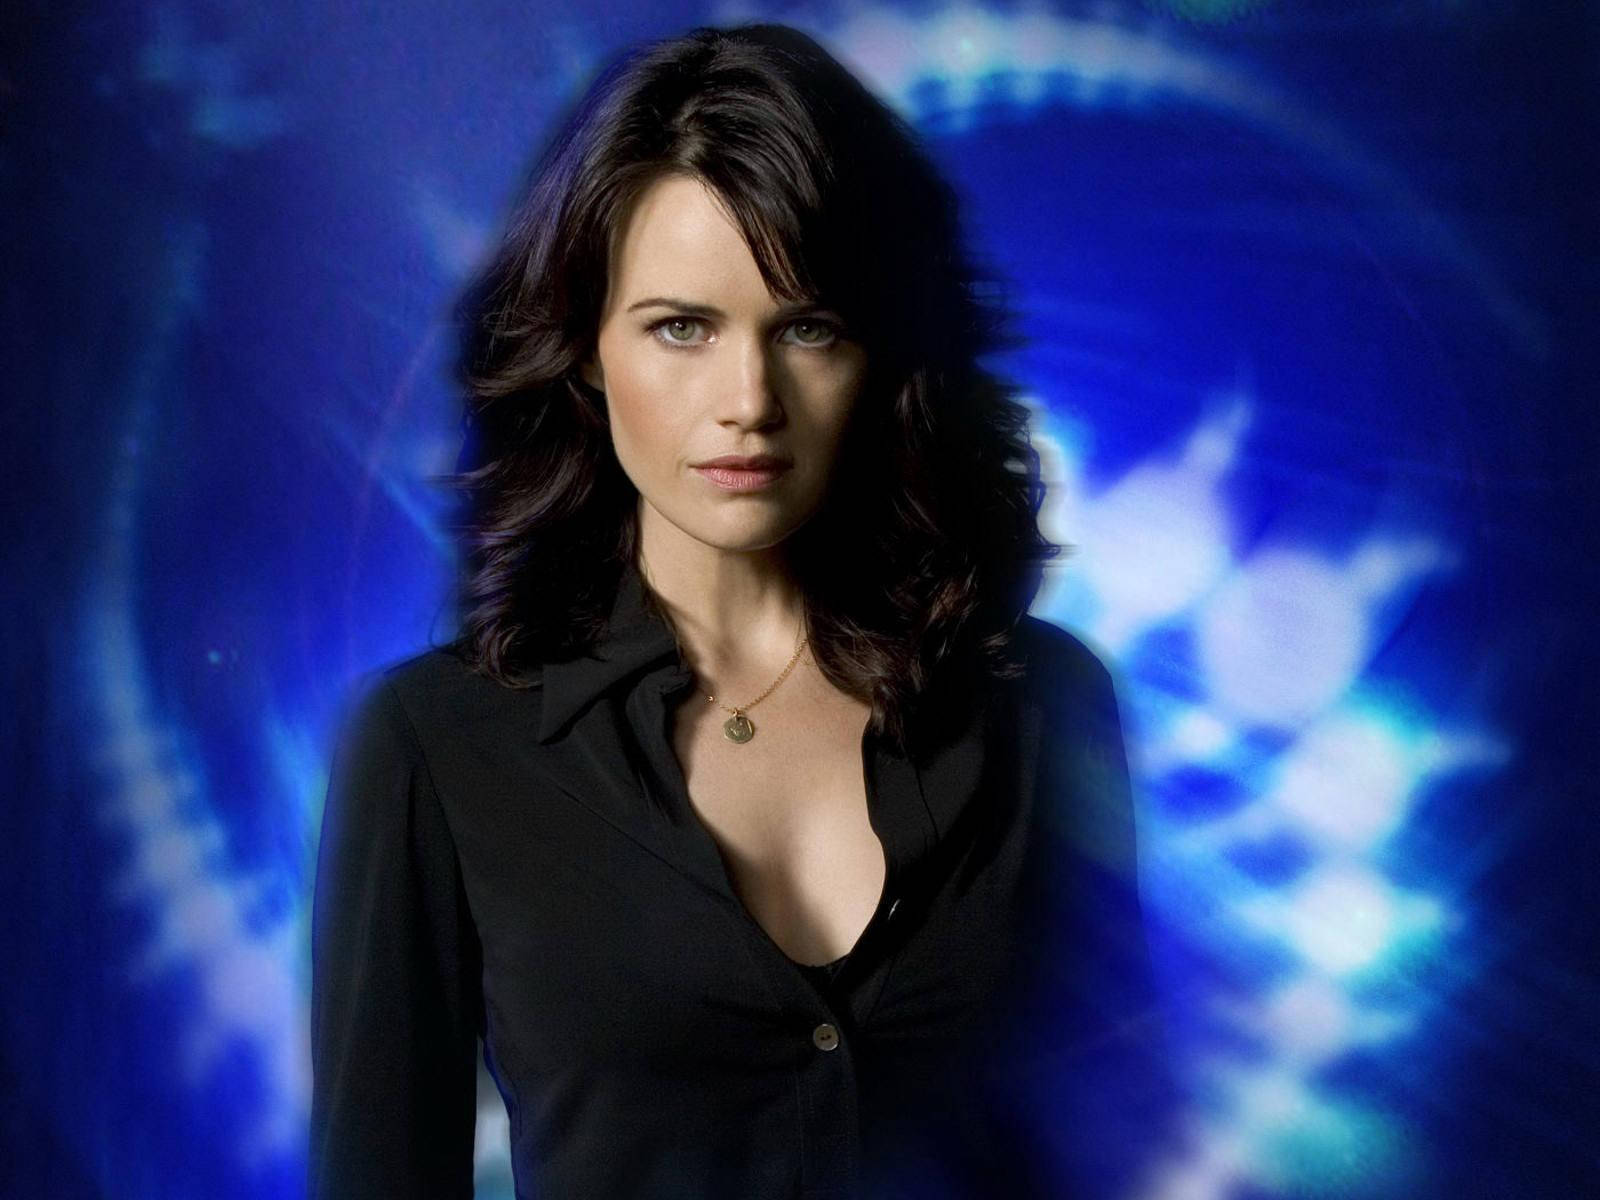 Carla Gugino In Blue Abstract Wall Wallpaper